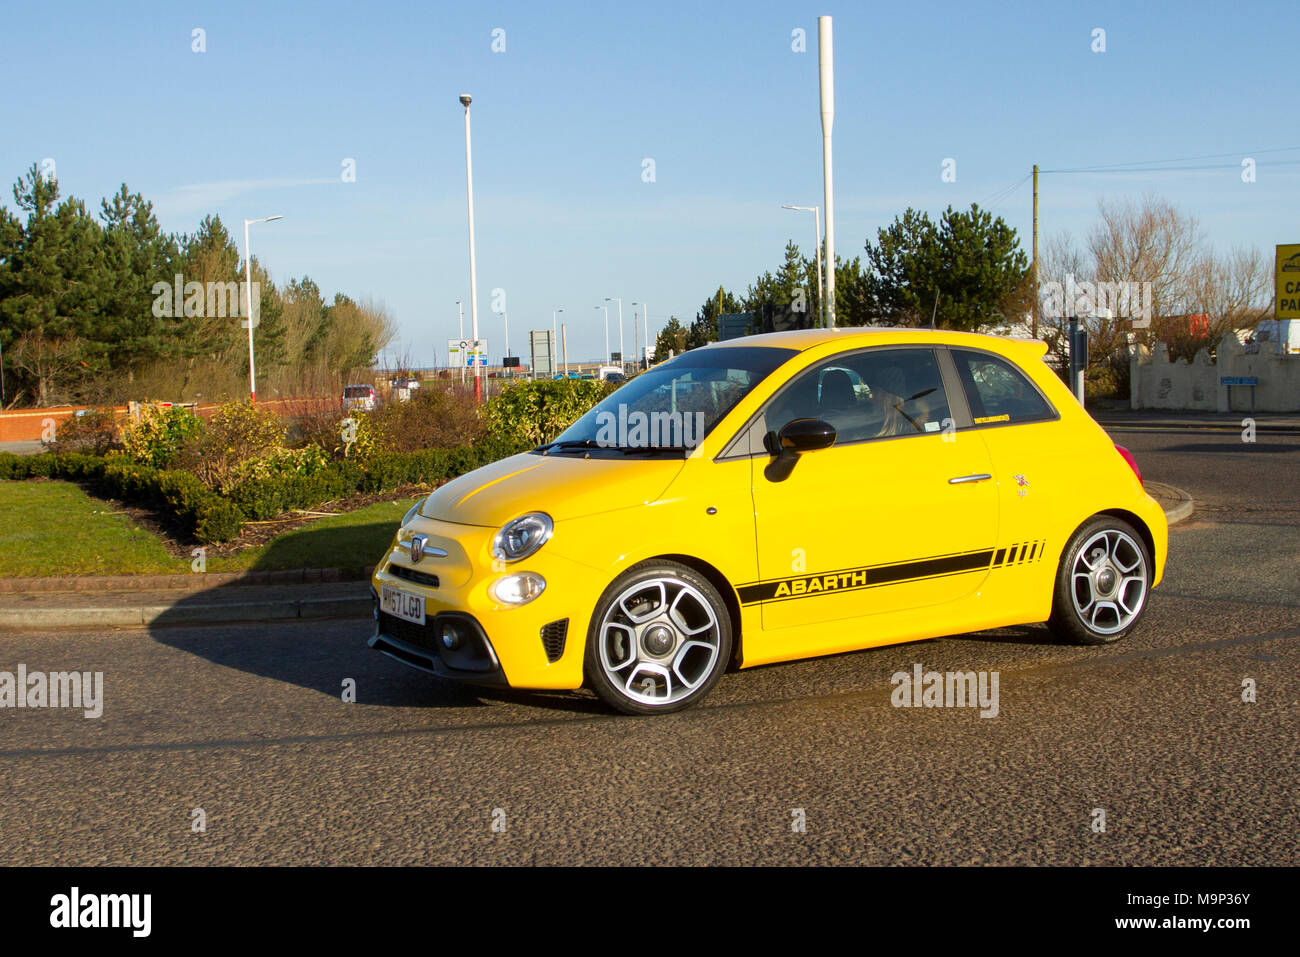 2018 yellow Abarth 2dr, two-door, four-passenger, transverse front-engine, front-wheel-drive saloon at the North-West Supercar event as  cars and tourists arrive in the coastal resort on a warm spring day. Abarth 595 cars are bumper to bumper on the seafront esplanade as classic & small car enthusiasts enjoy a motoring day out. Stock Photo